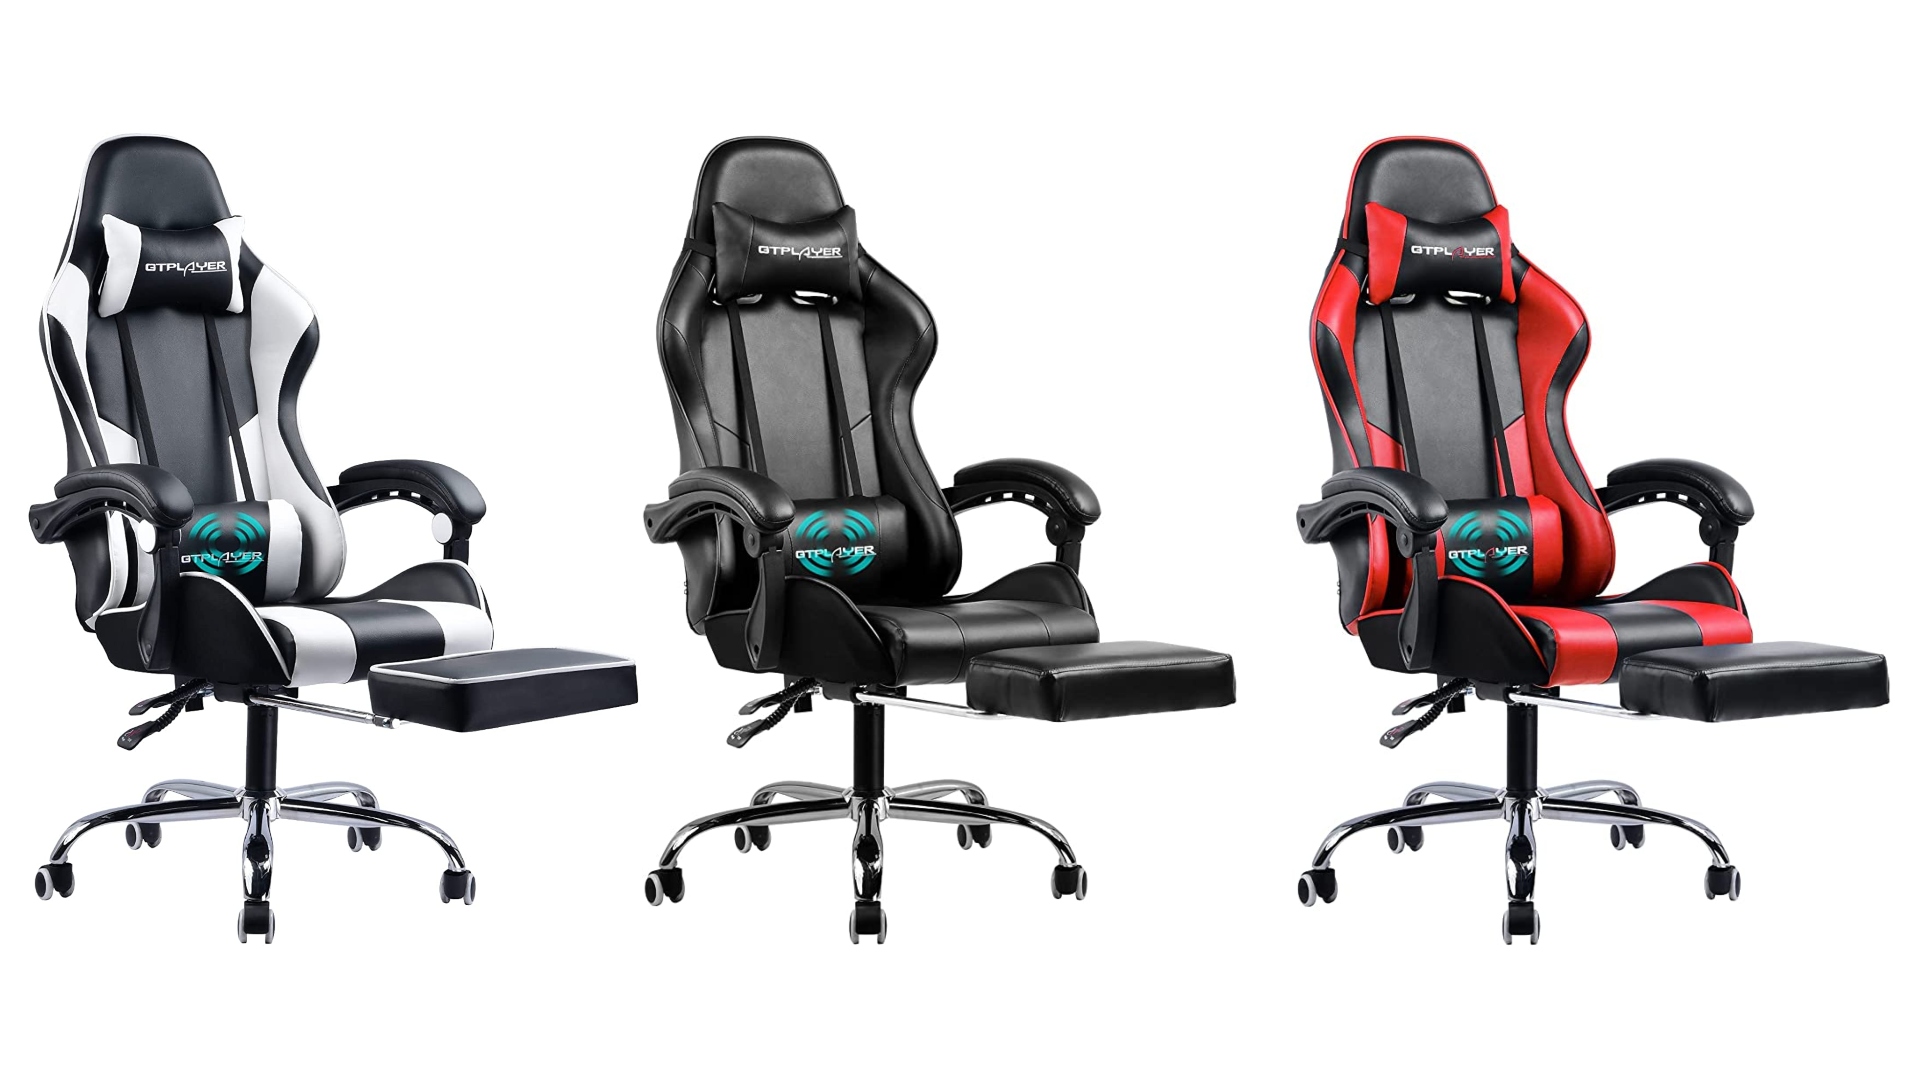 Best Amazon gaming chairs: GTplayer gaming chair. Image shows the chair in three models.